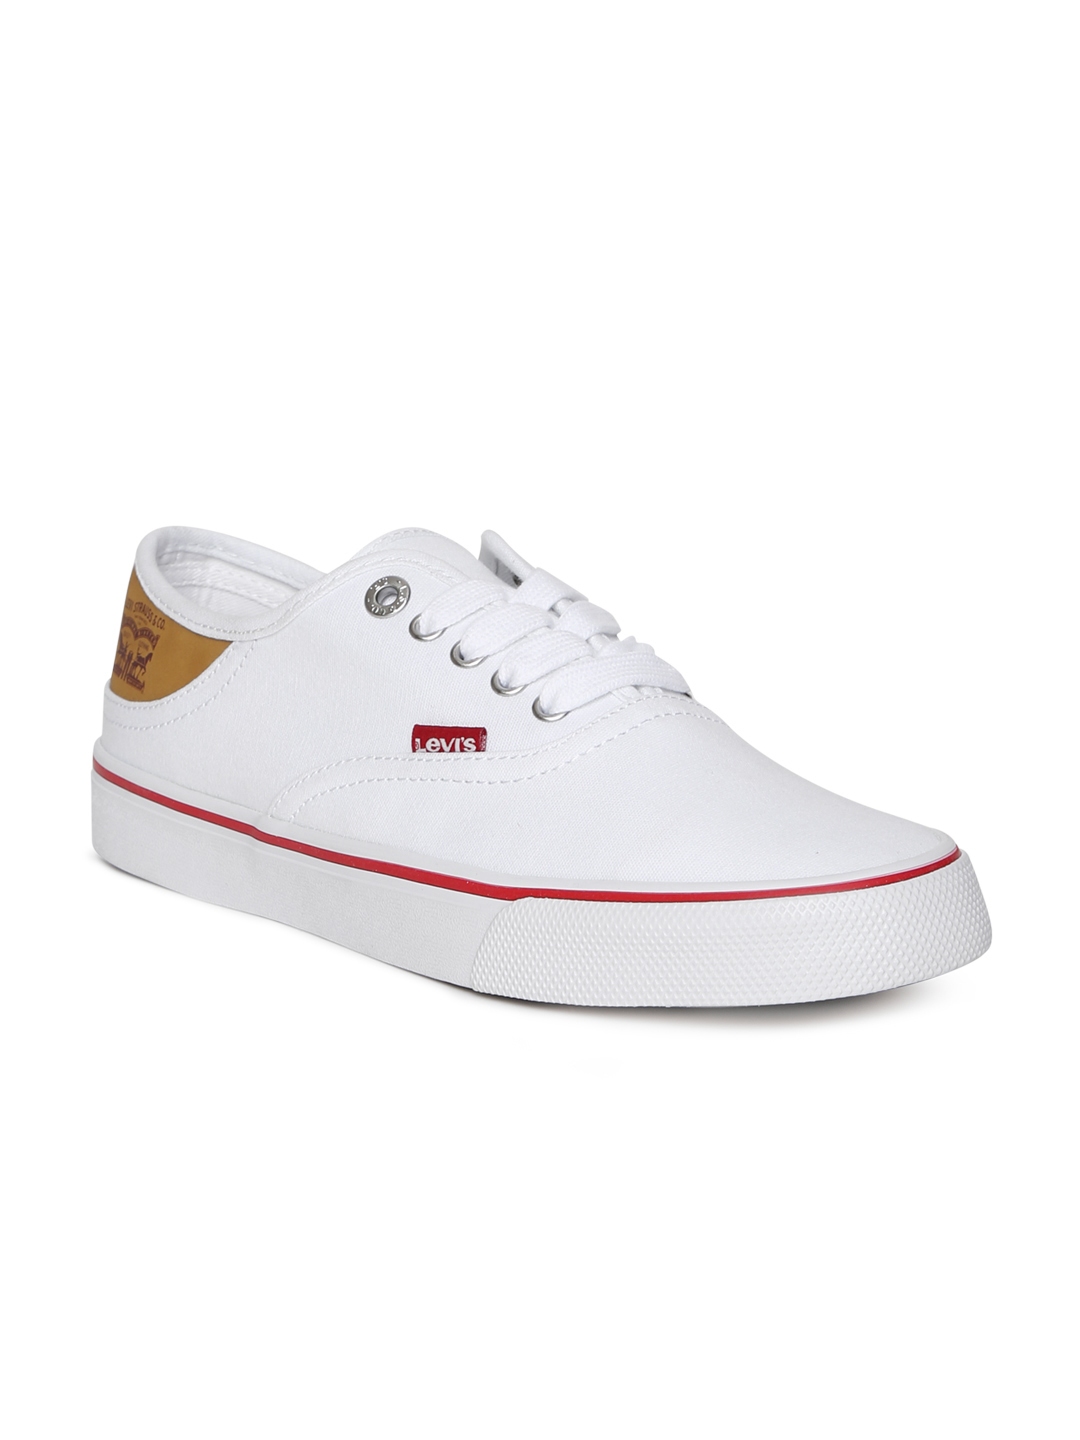 Buy Levis Men White Sneakers - Casual Shoes for Men 2447500 | Myntra